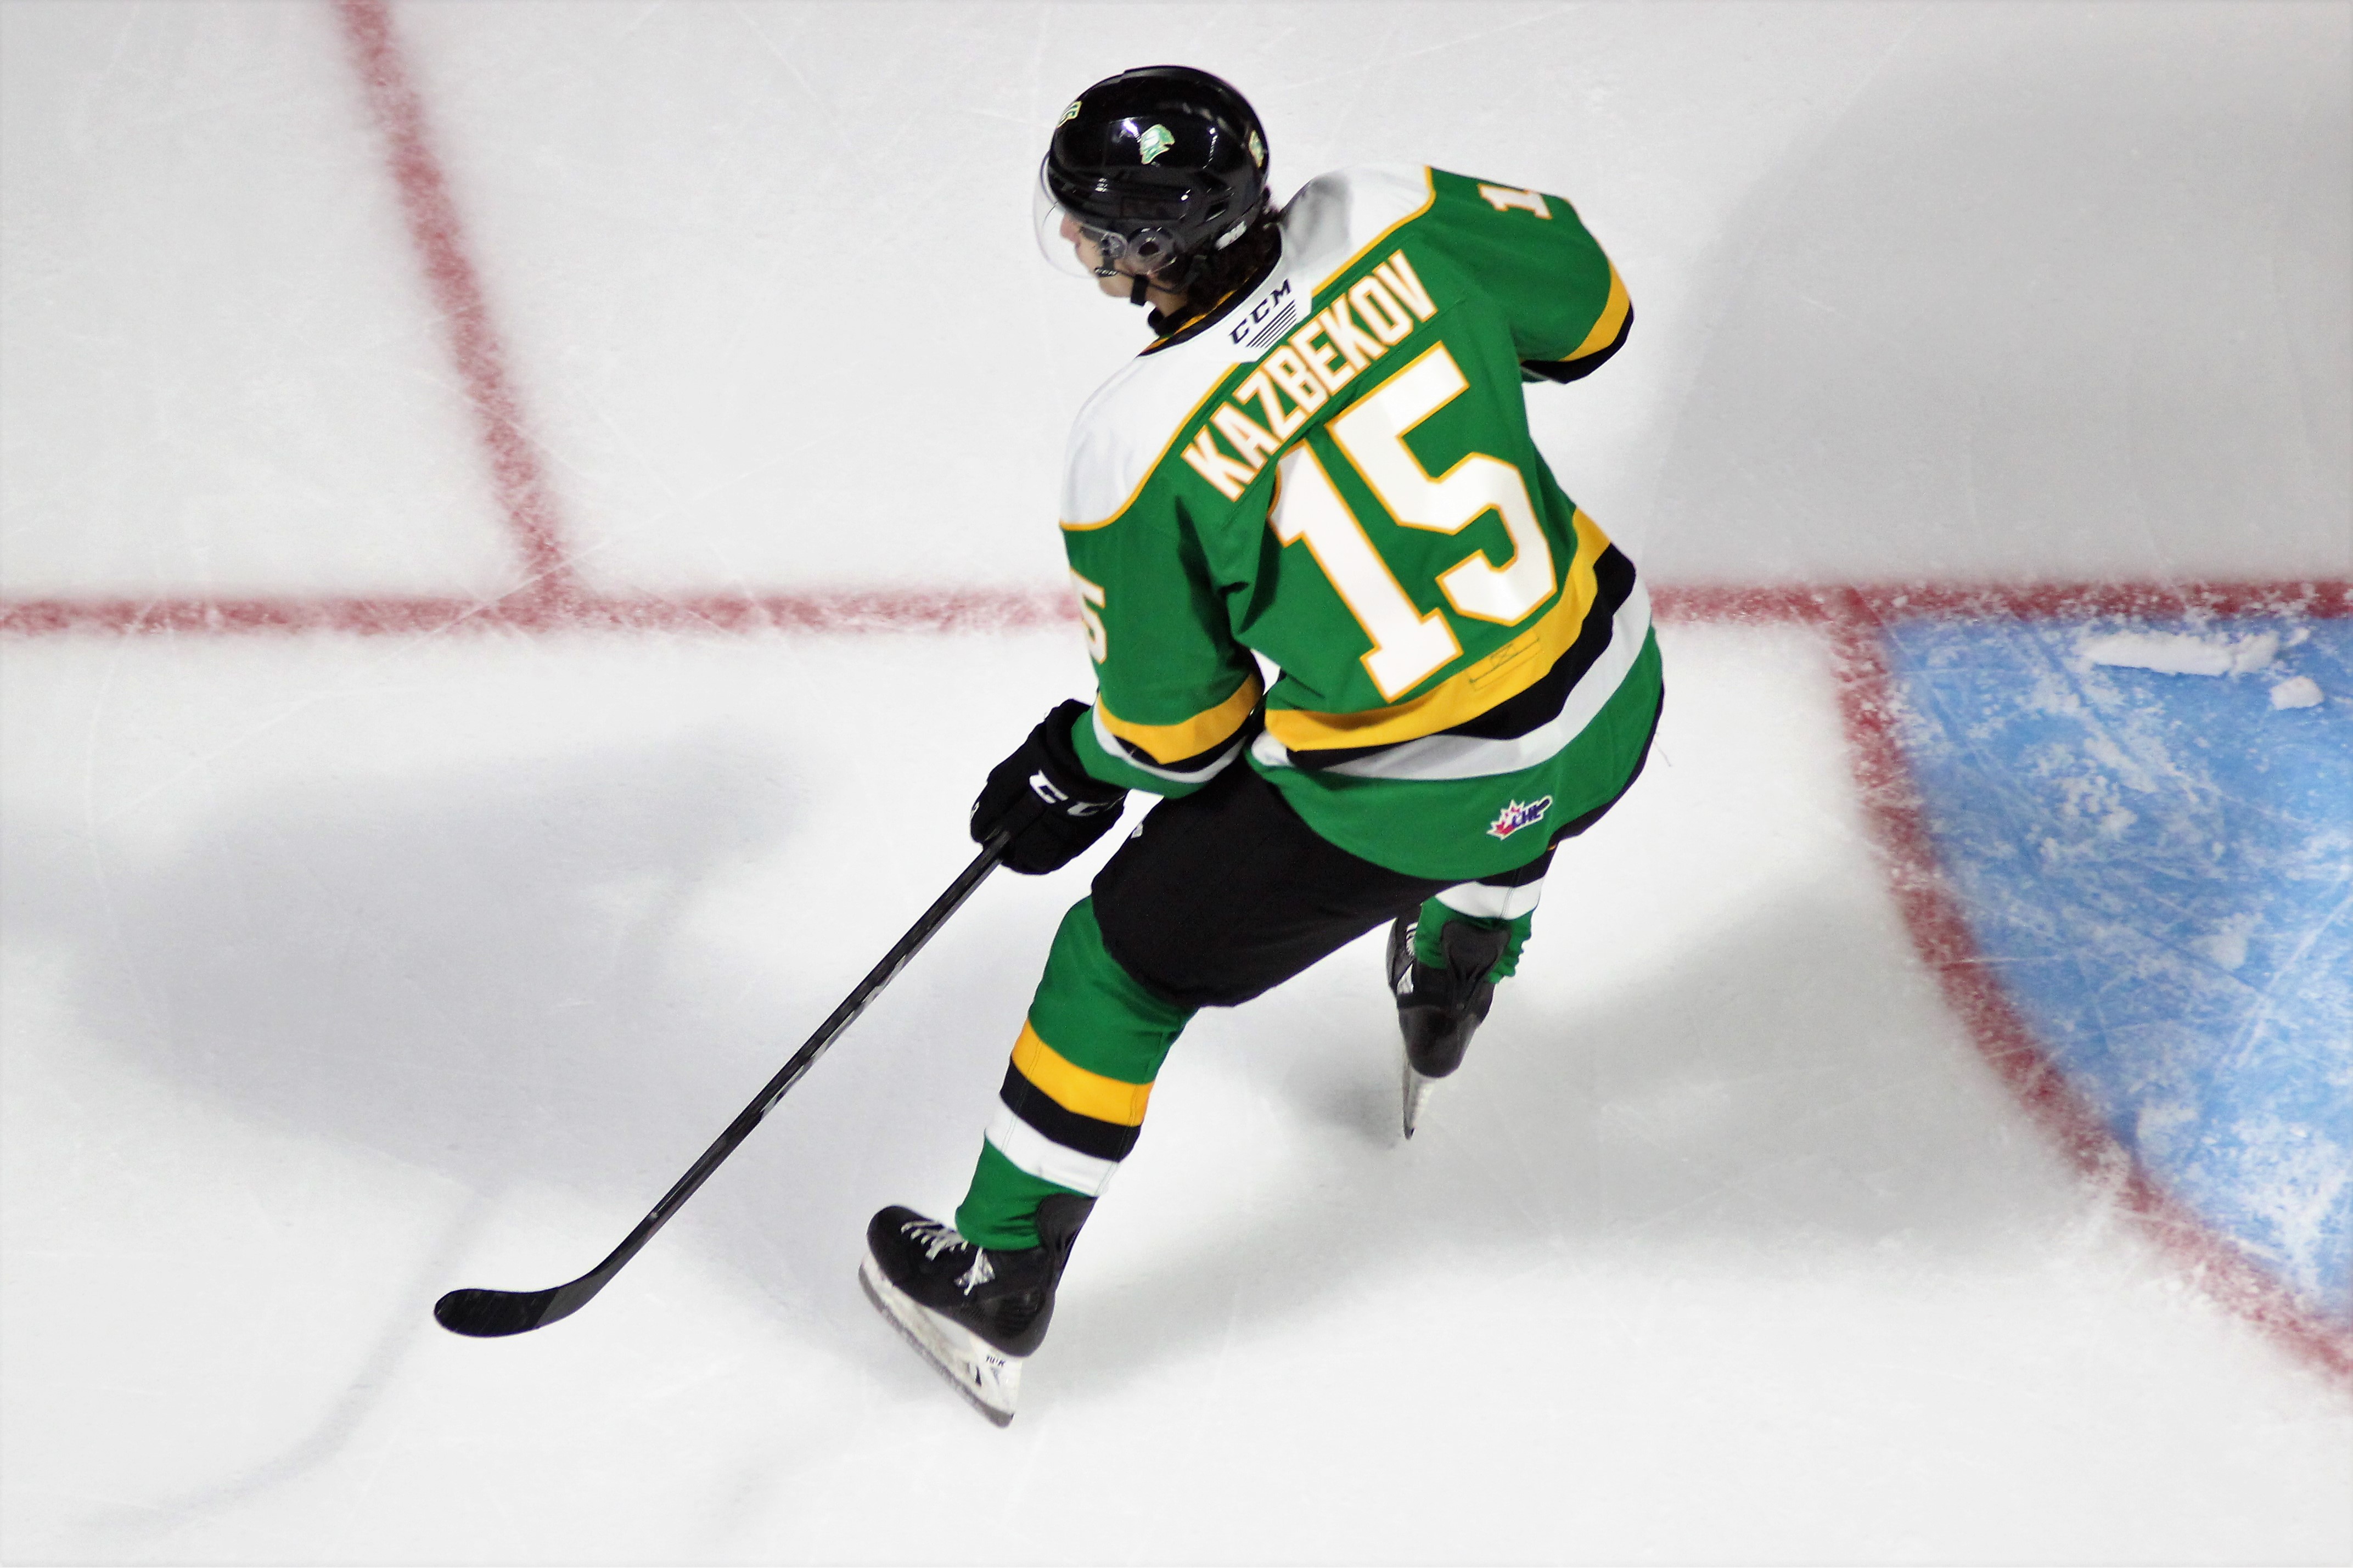 KNIGHTS CAN'T SOLVE WHALERS IN SHOOTOUT - London Knights